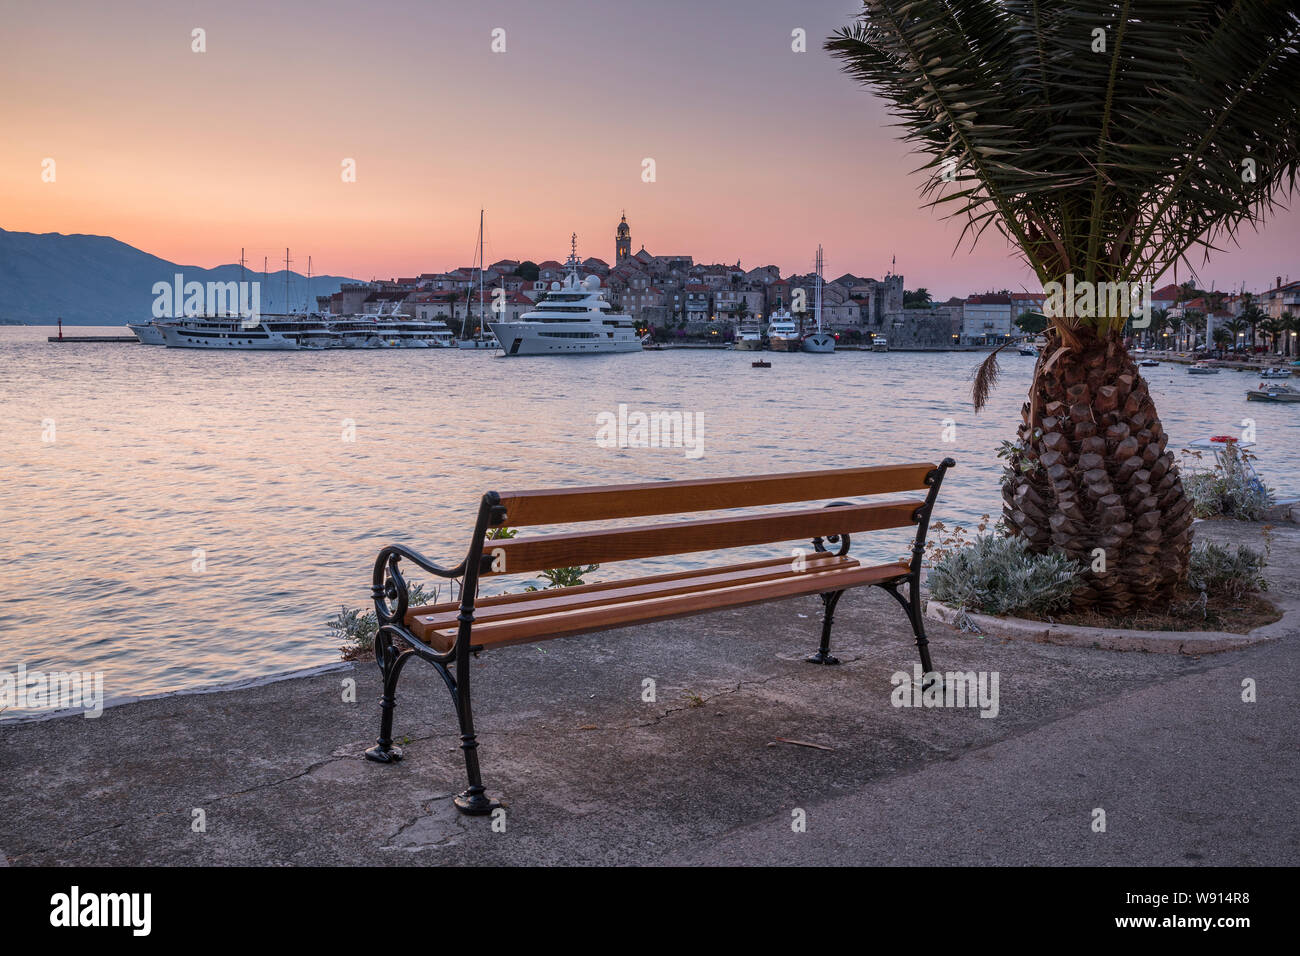 Korcula old town before sunrise Stock Photo